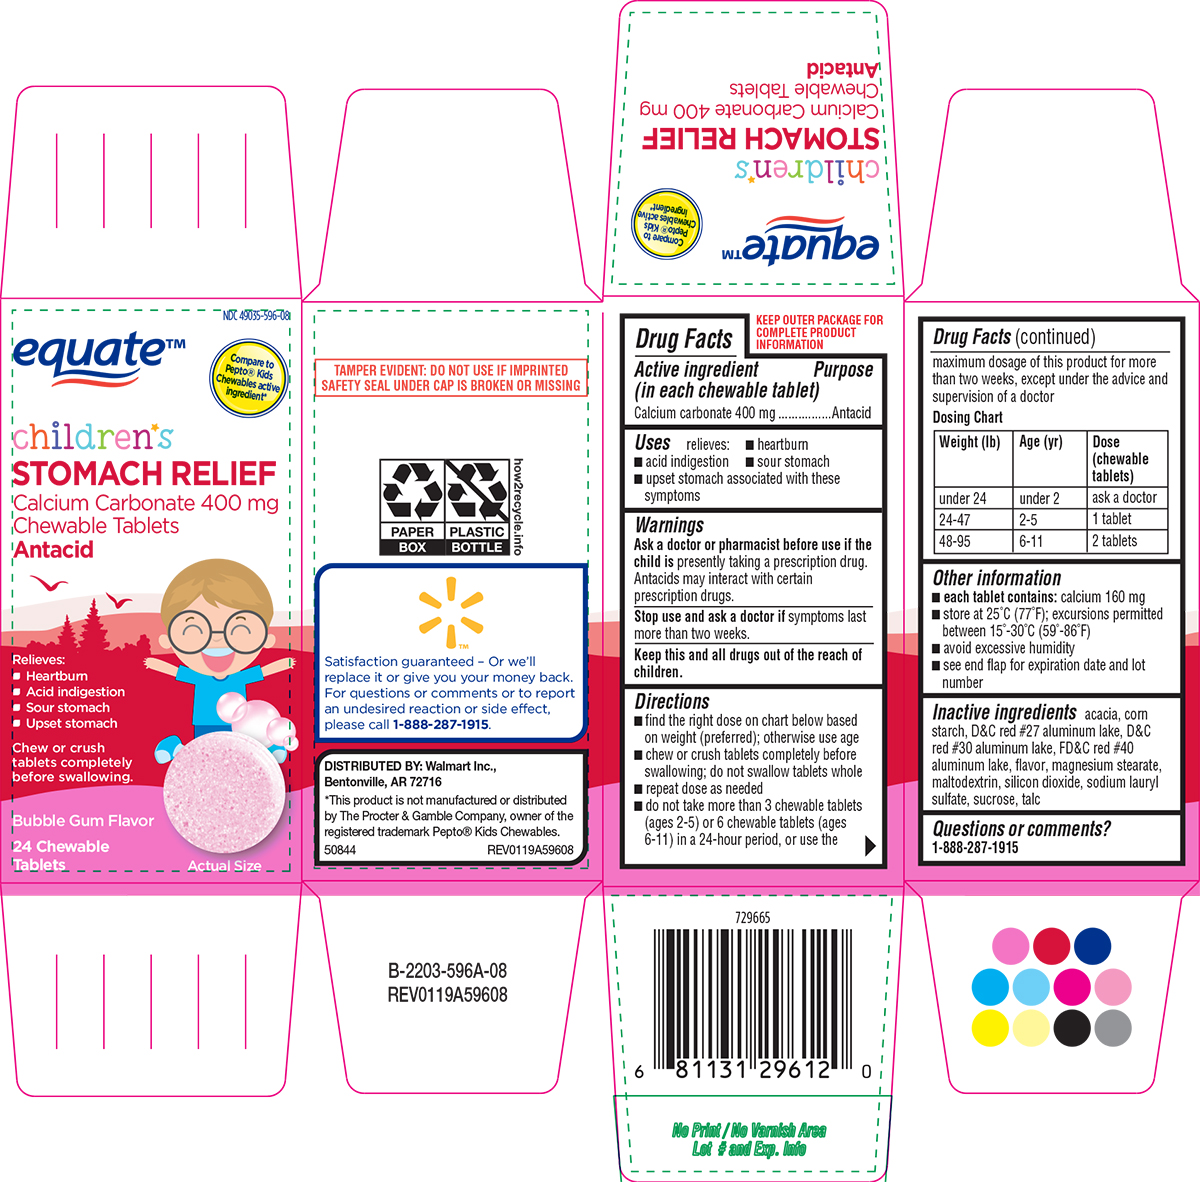 Childrens Stomach Relief | Calcium Carbonate Tablet, Chewable Breastfeeding